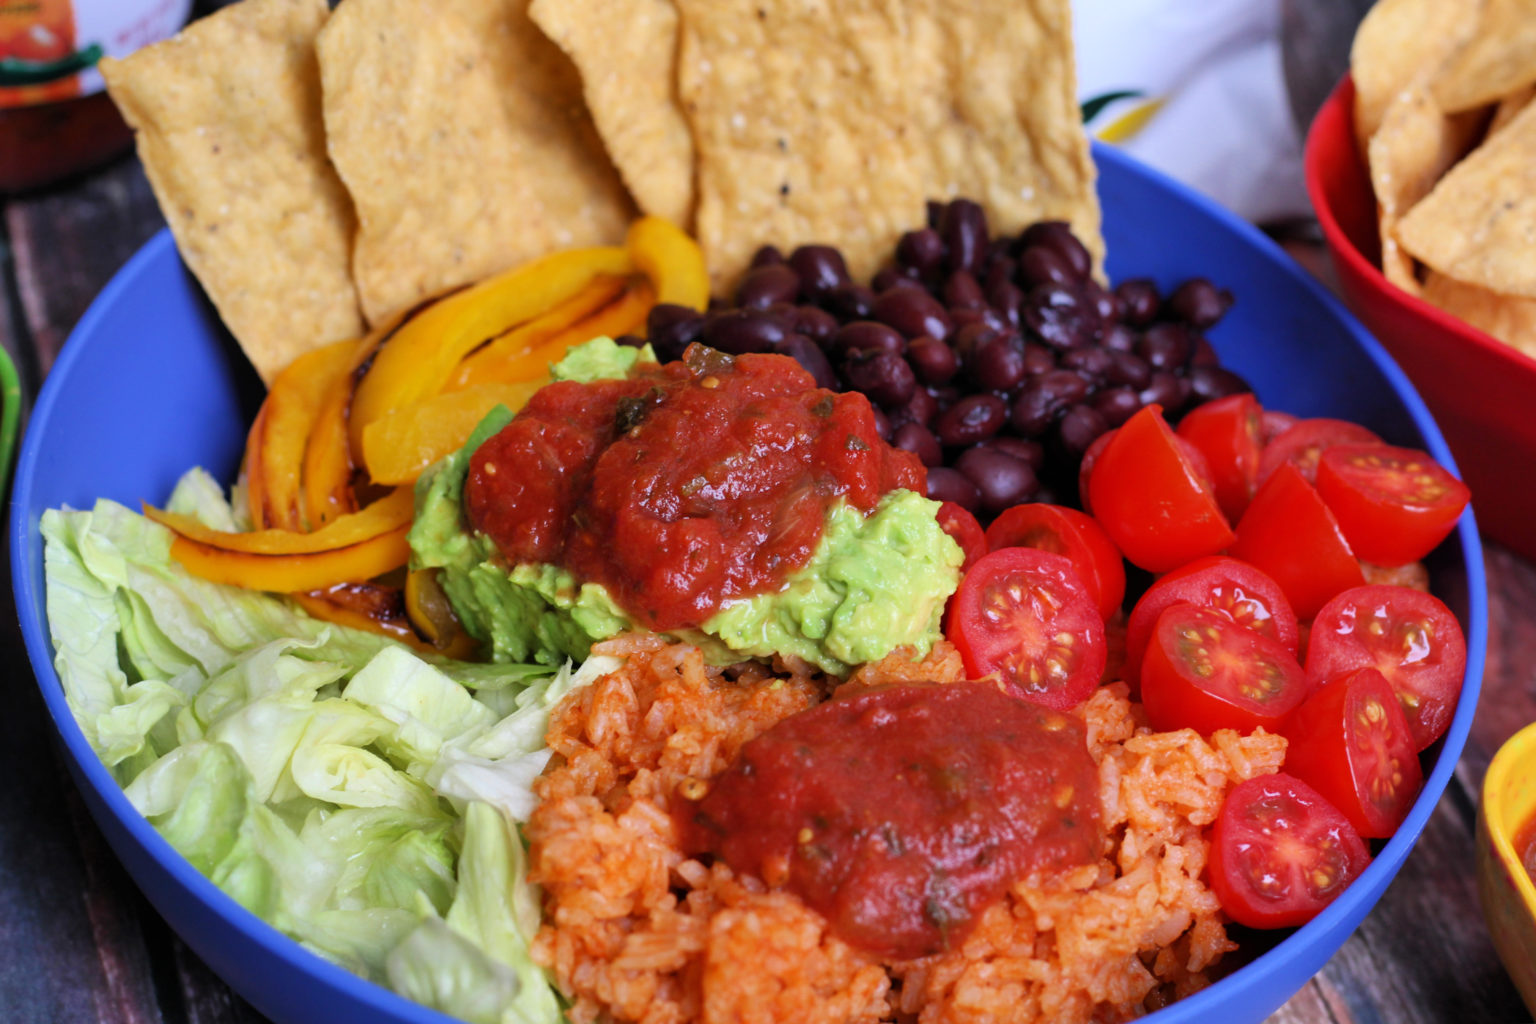 Vegetarian Burrito Bowl - Flavorful Meal, Ready in Less than 30 Minutes